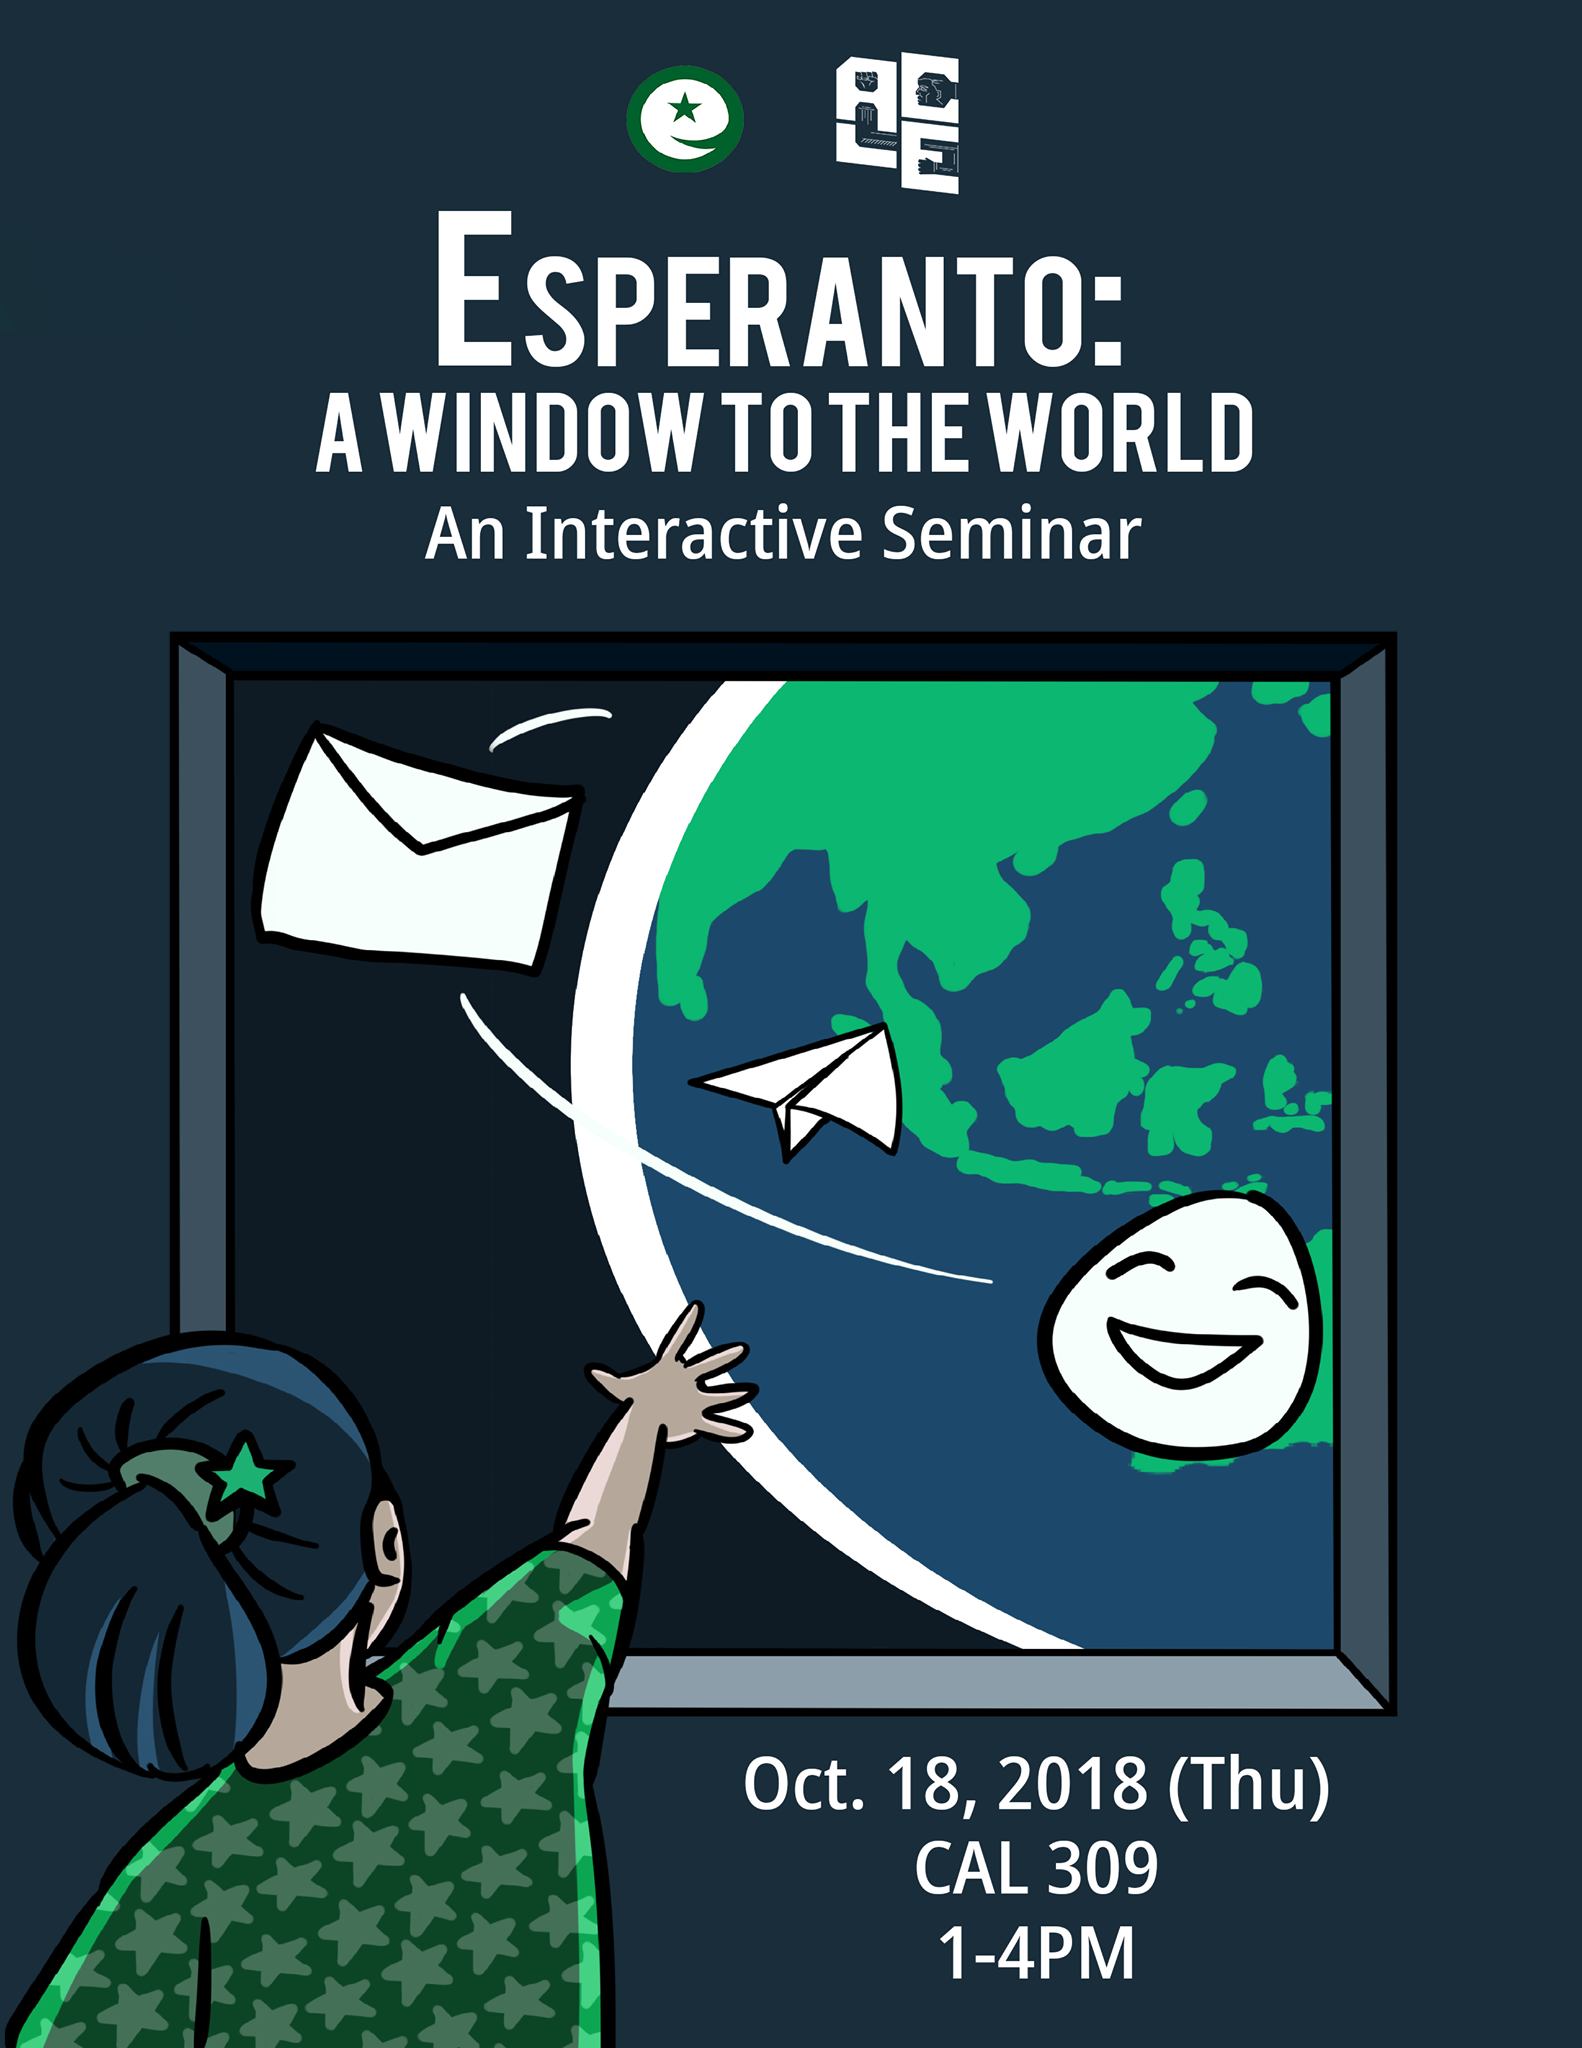 Esperanto: A Window to the World, ACLE 1st Semester 2018-2019